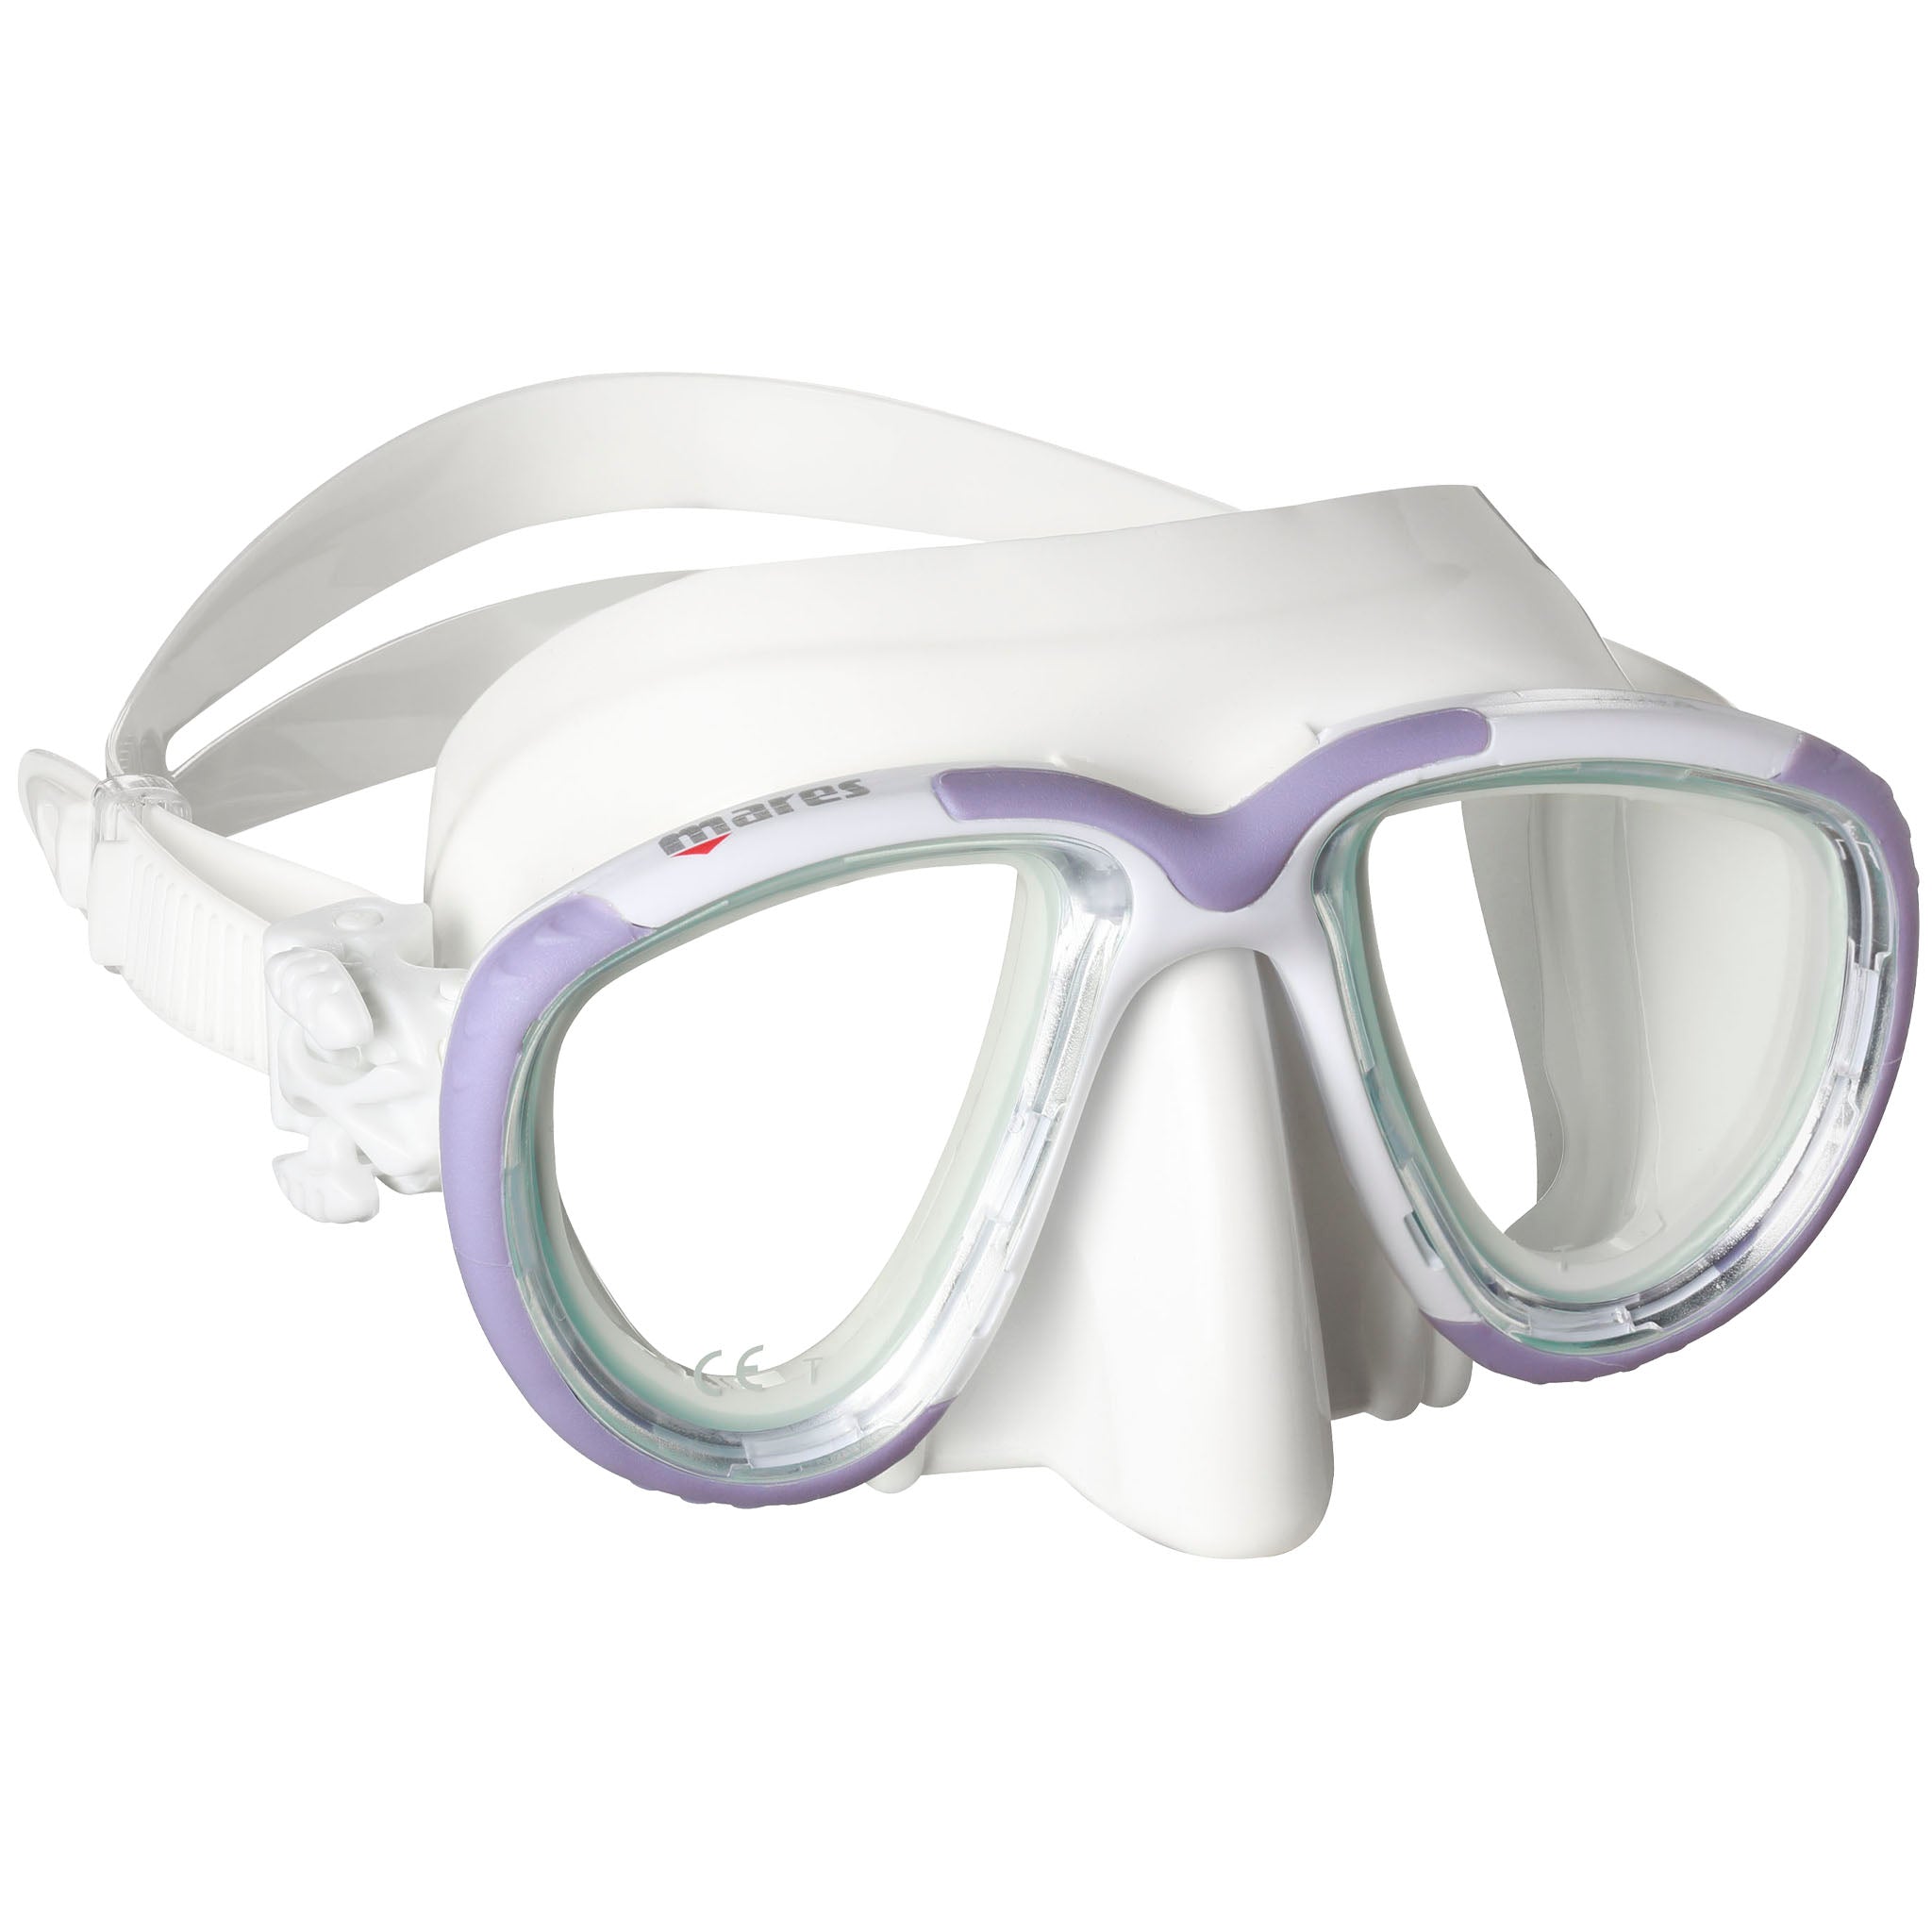 Mares Tana Mask & Bay Snorkel Package